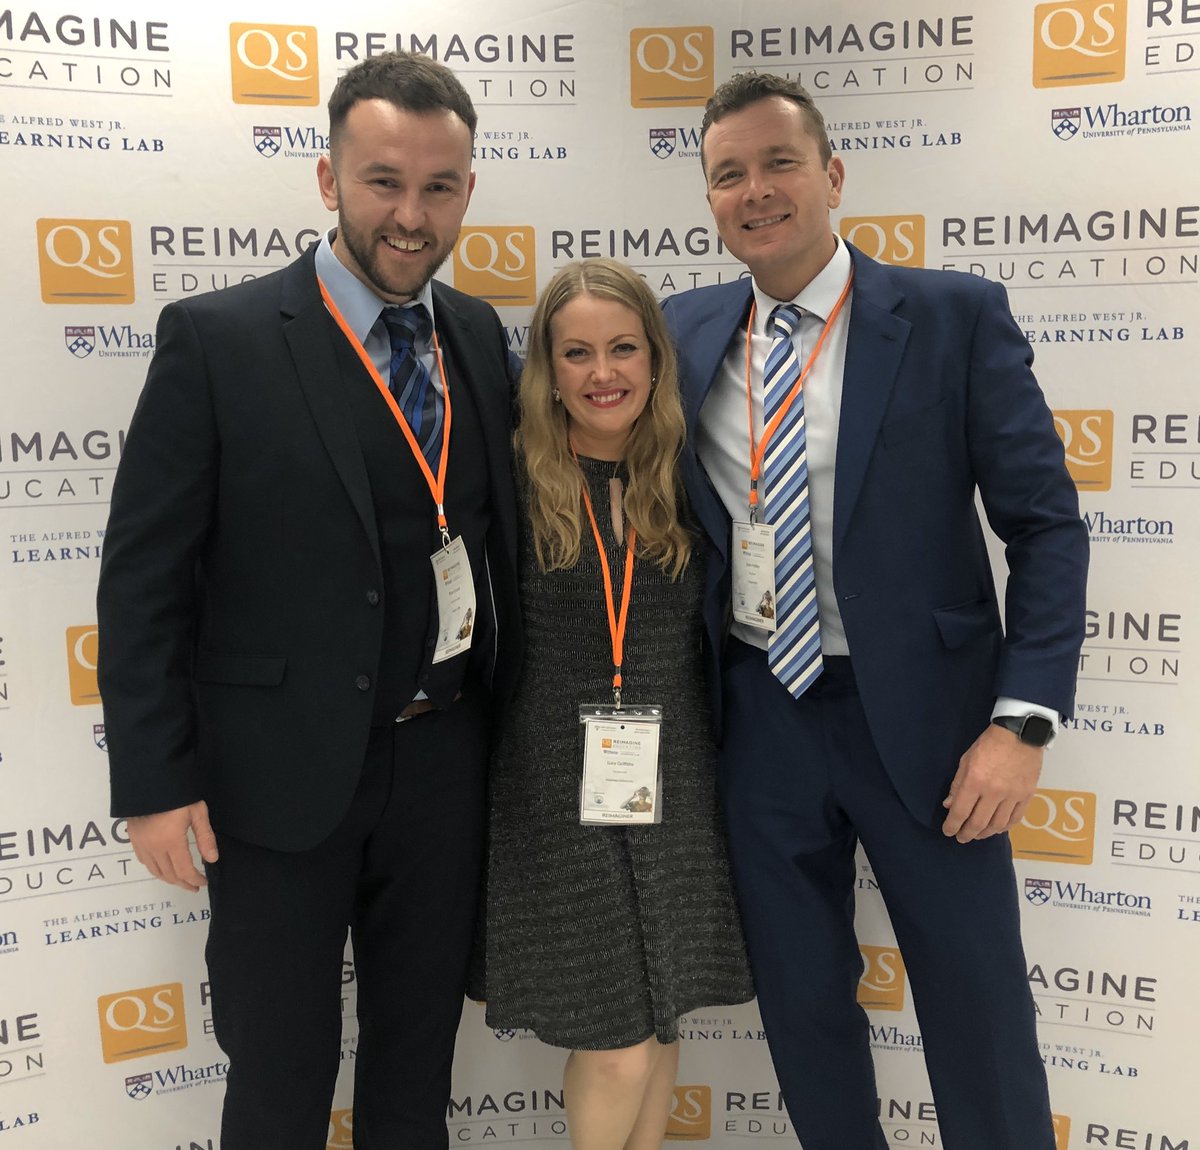 It was dubbed the ‘Oscars of Education’ & tonight the #Reimagine19 Gala Dinner didn’t disappoint

Alongside @SwanseaUni, @Aspire2Be @a2b_ibroadcast was shortlisted from 1500 global nominations from as far as Qatar, Zurich & Singapore #employability 

So close, bring on next year!